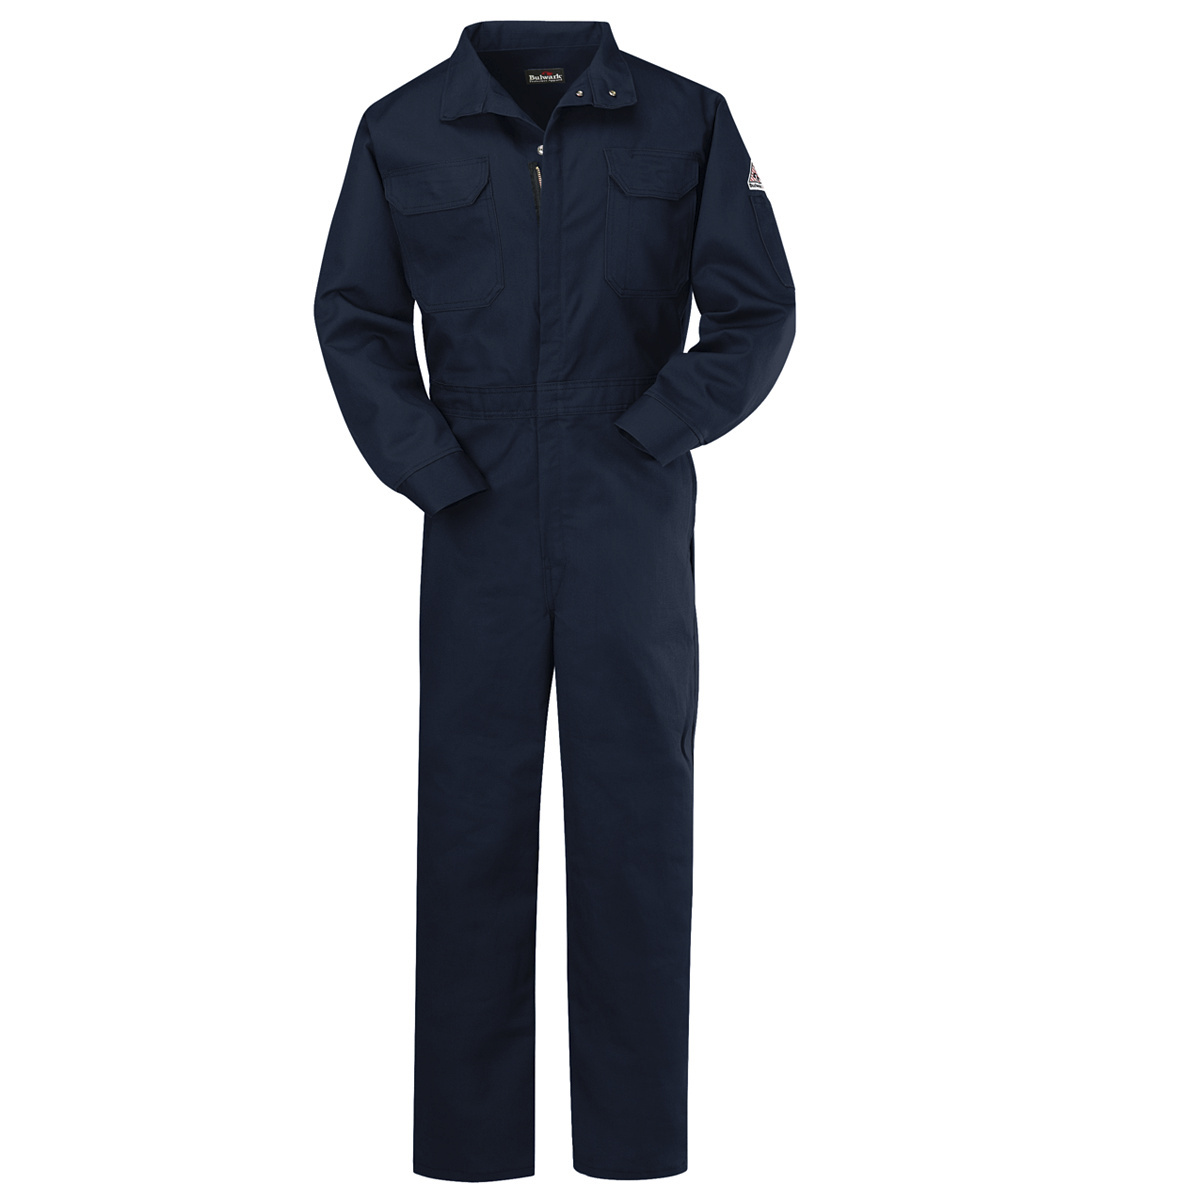 Bulwark® Small| Regular Navy Blue Westex Ultrasoft® Twill/Cotton/Nylon Flame Resistant Coveralls With Zipper Front Closure